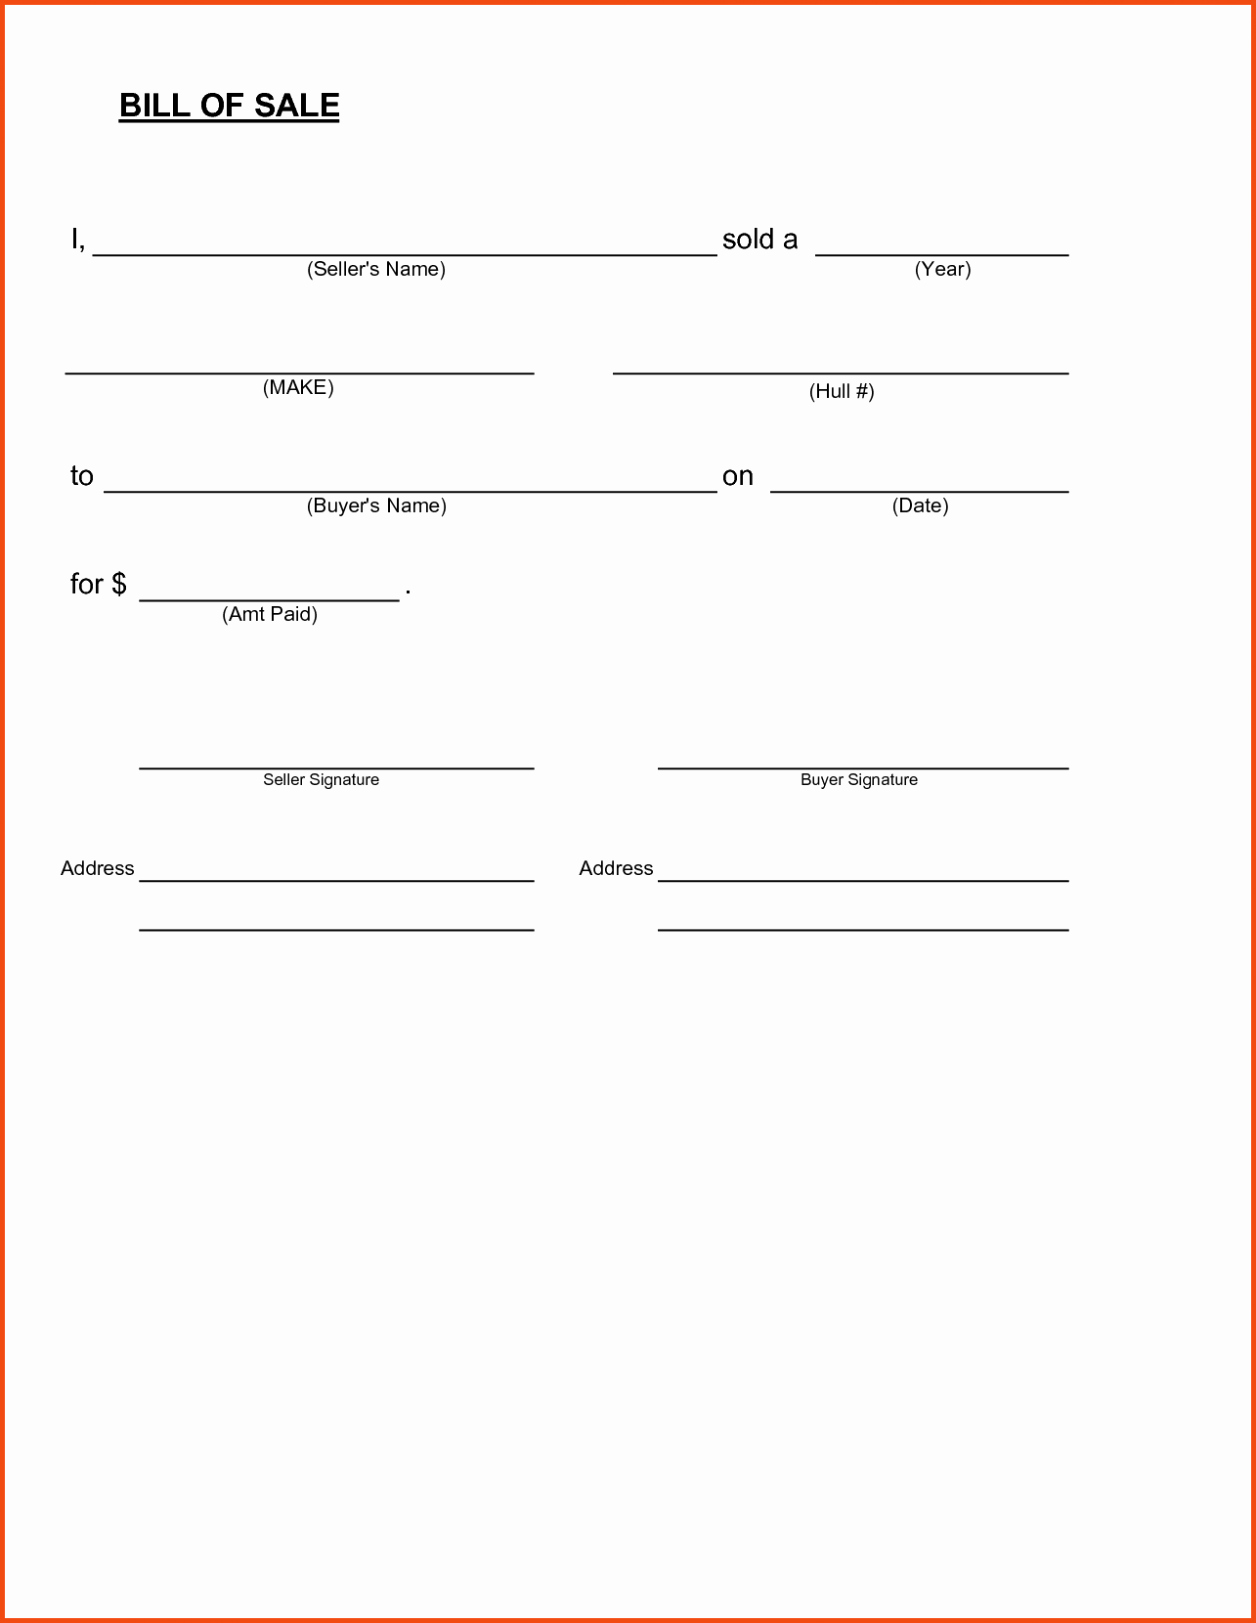 Bill Of Sale Automobile Template Lovely Sample Bill Of Sale form for Car Printable